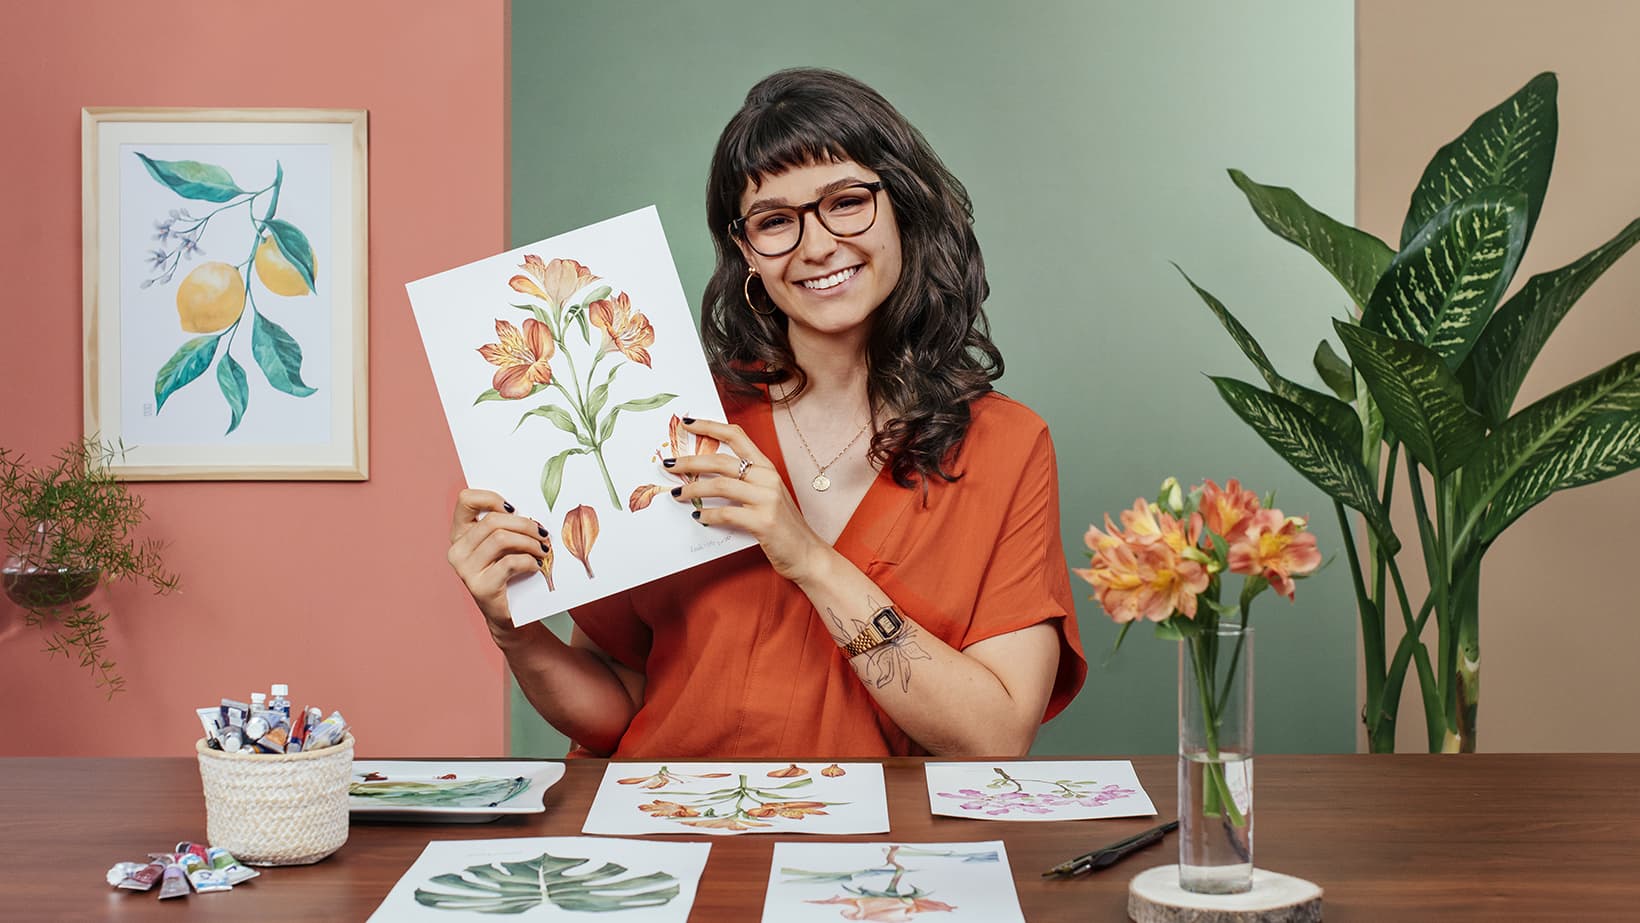 Botanical Watercolor: Illustrate the Anatomy of Flowers